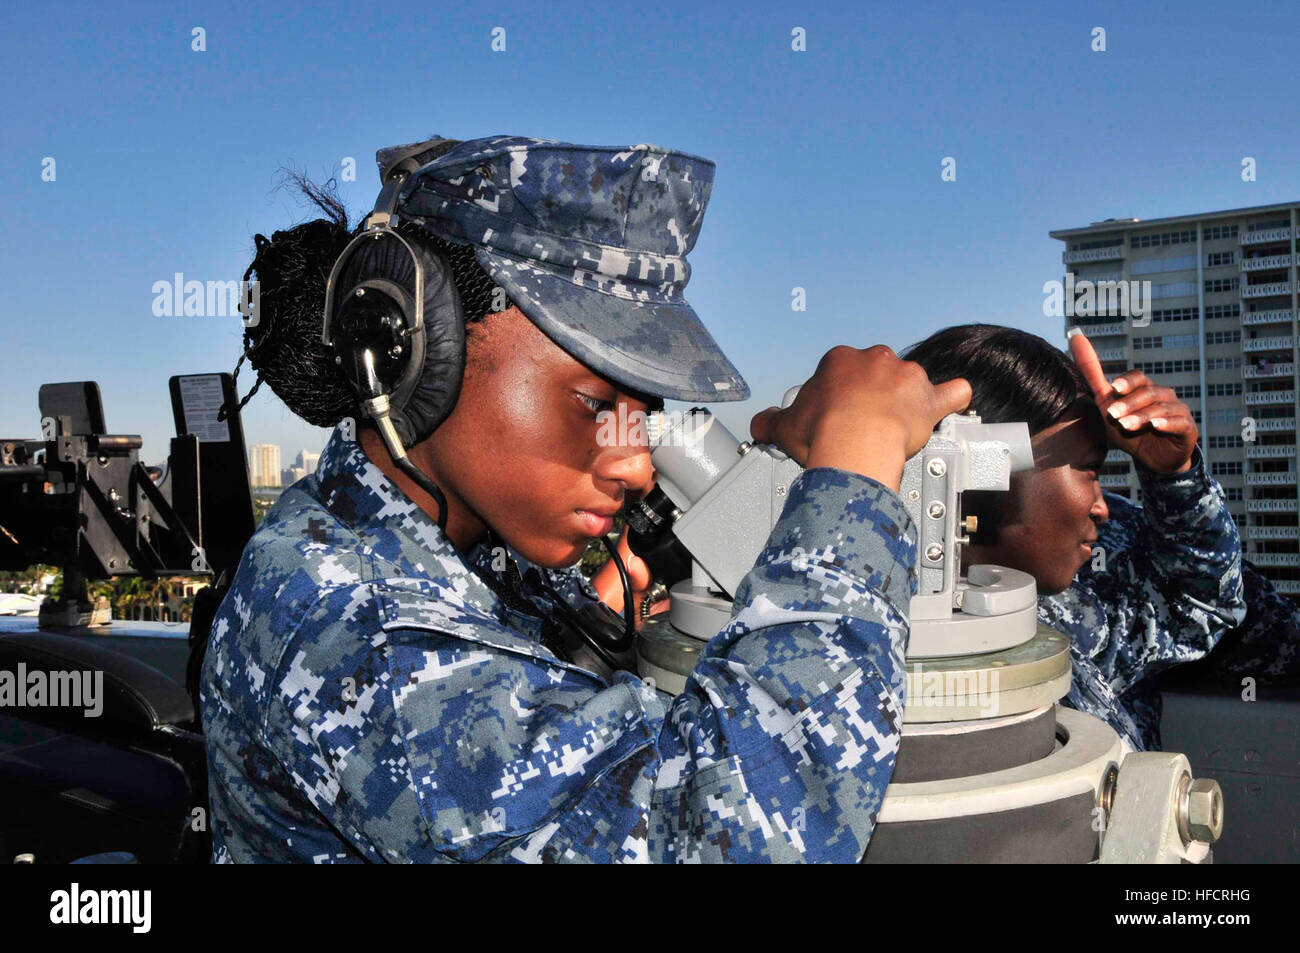 140505-N-YO707-070 PORT EVERGLADES, Fla. (May 5, 2014) Quartermaster Seaman Tia Mclellan reads bearing during sea and anchor evolution aboard the amphibious transport dock ship USS New York (LPD 21). New York is underway conducting training and exercises for a future deployment. (U.S. Navy photo by Mass Communication Specialist 2nd Class Cyrus Roson/ Released) Port Everglades Fleet Week2014 140505-N-YO707-070 Stock Photo